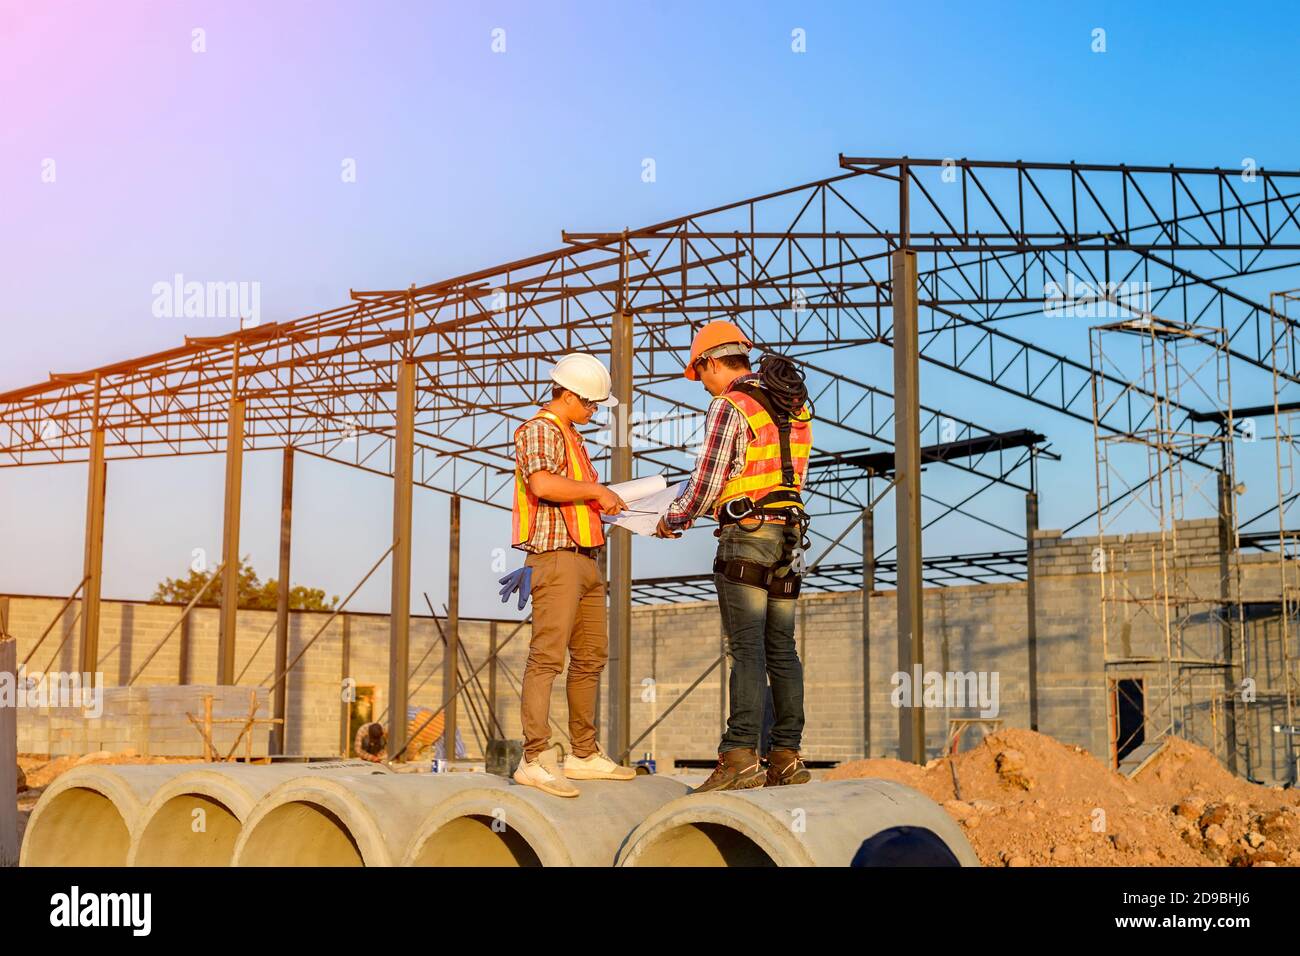 Two construction workers on a building site, Thailand Stock Photo